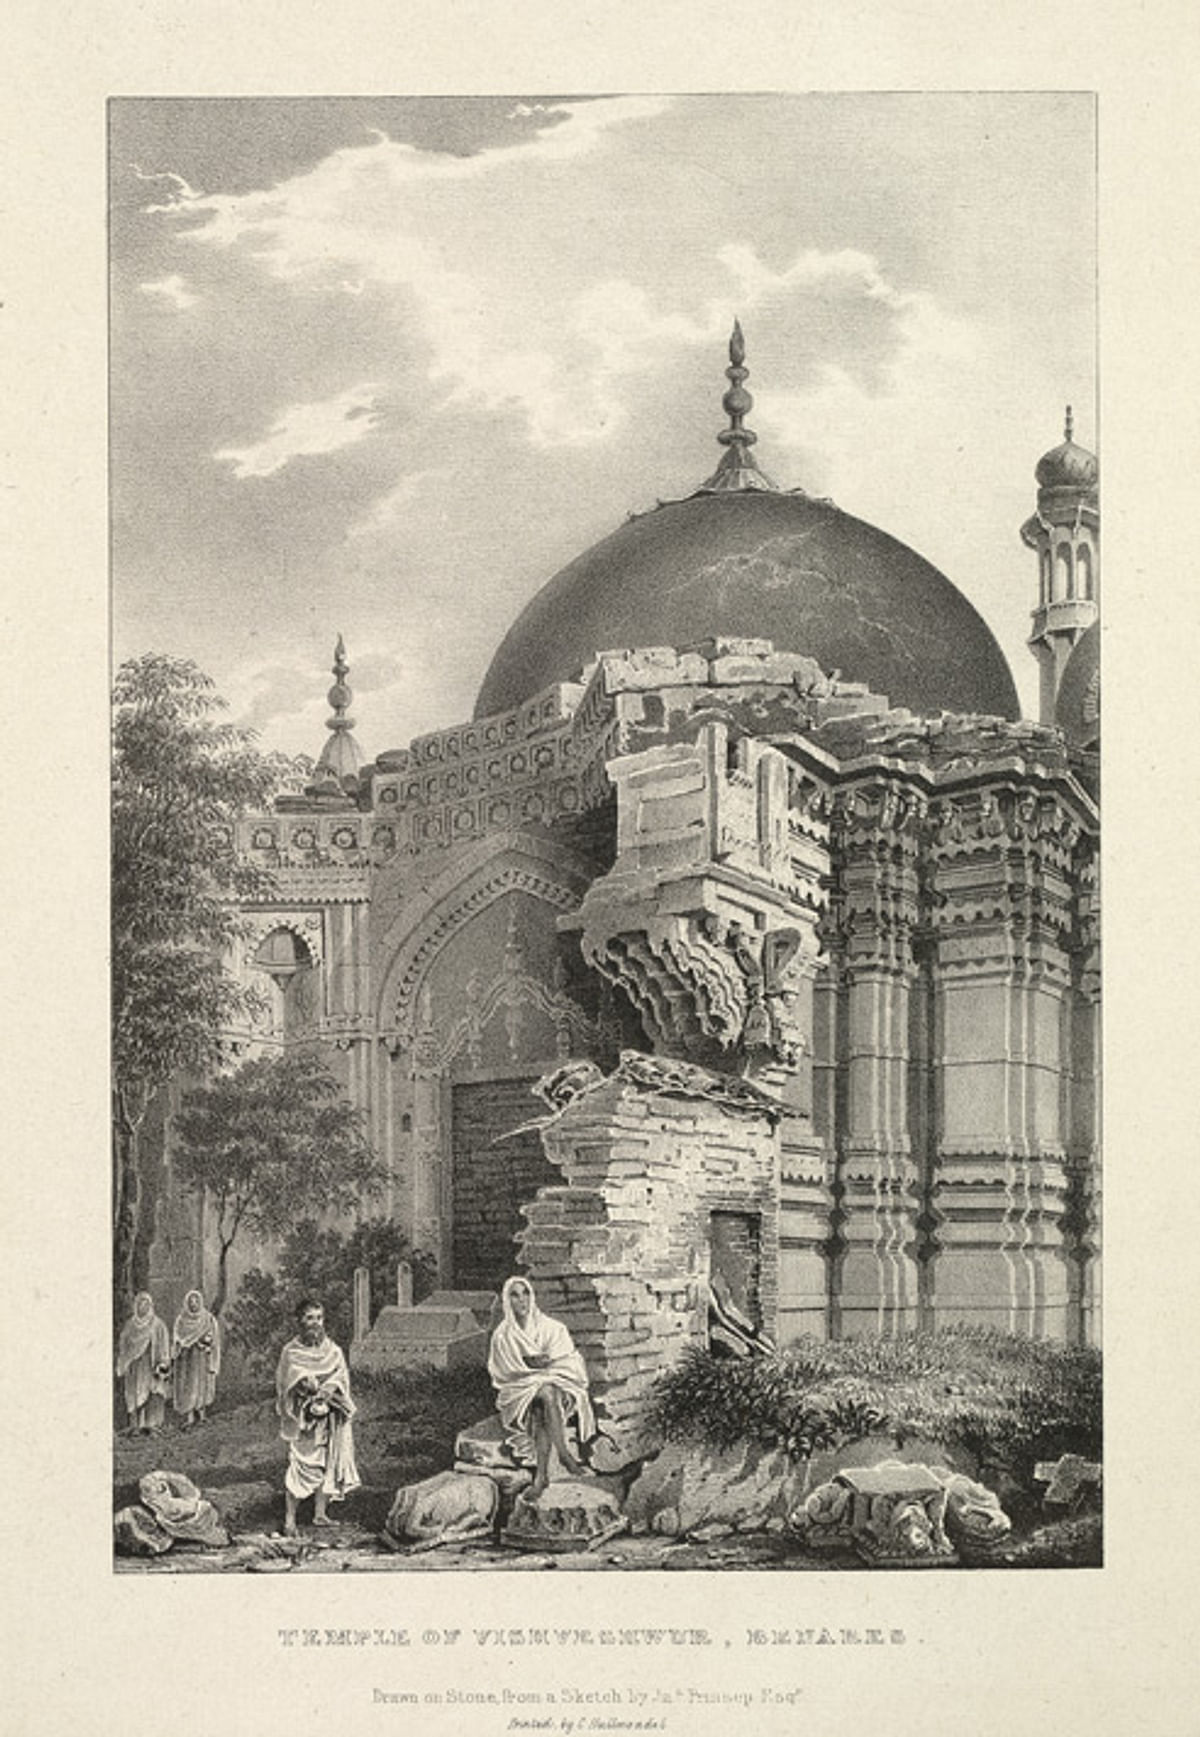 James Prinsep: The officer of the East India Company who surveyed 200 years ago and claimed the temple instead of Gyanvapi